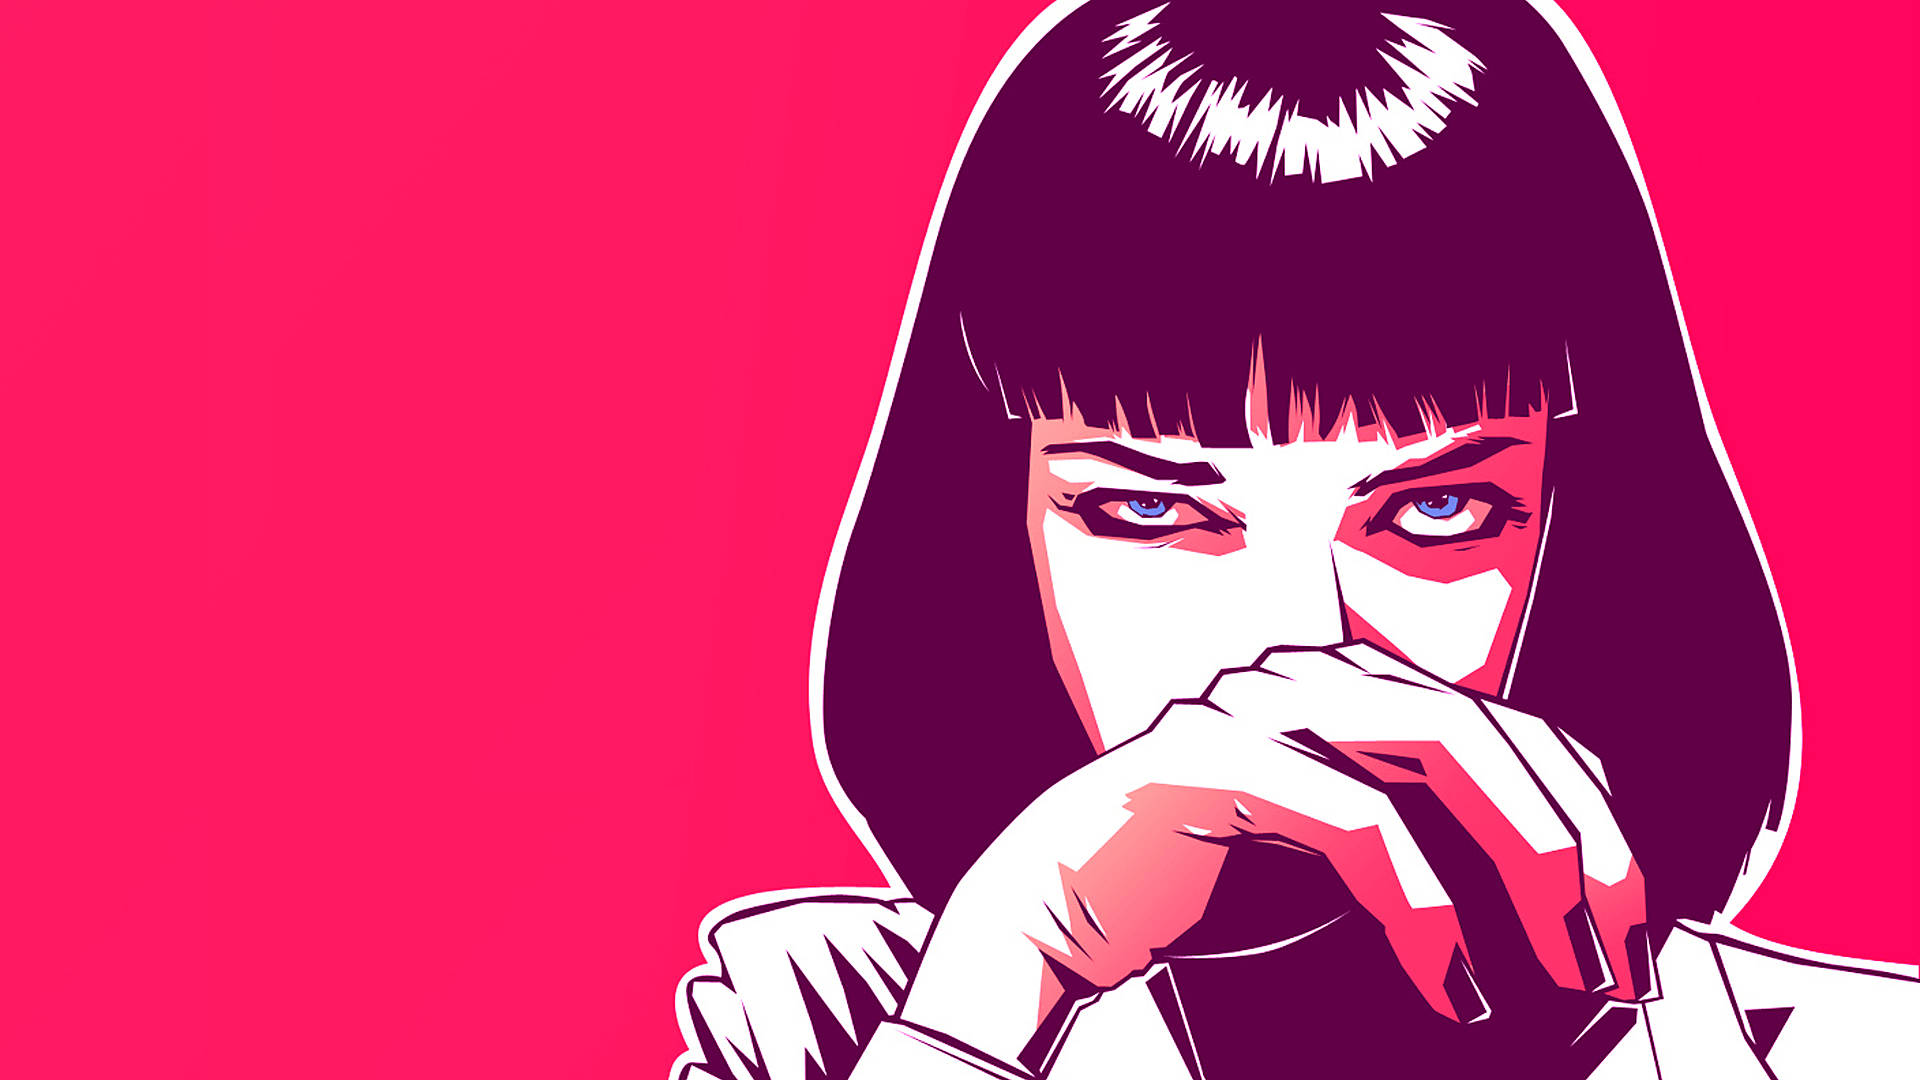 Pulp Fiction Mia Wallace Aesthetic Artwork Background